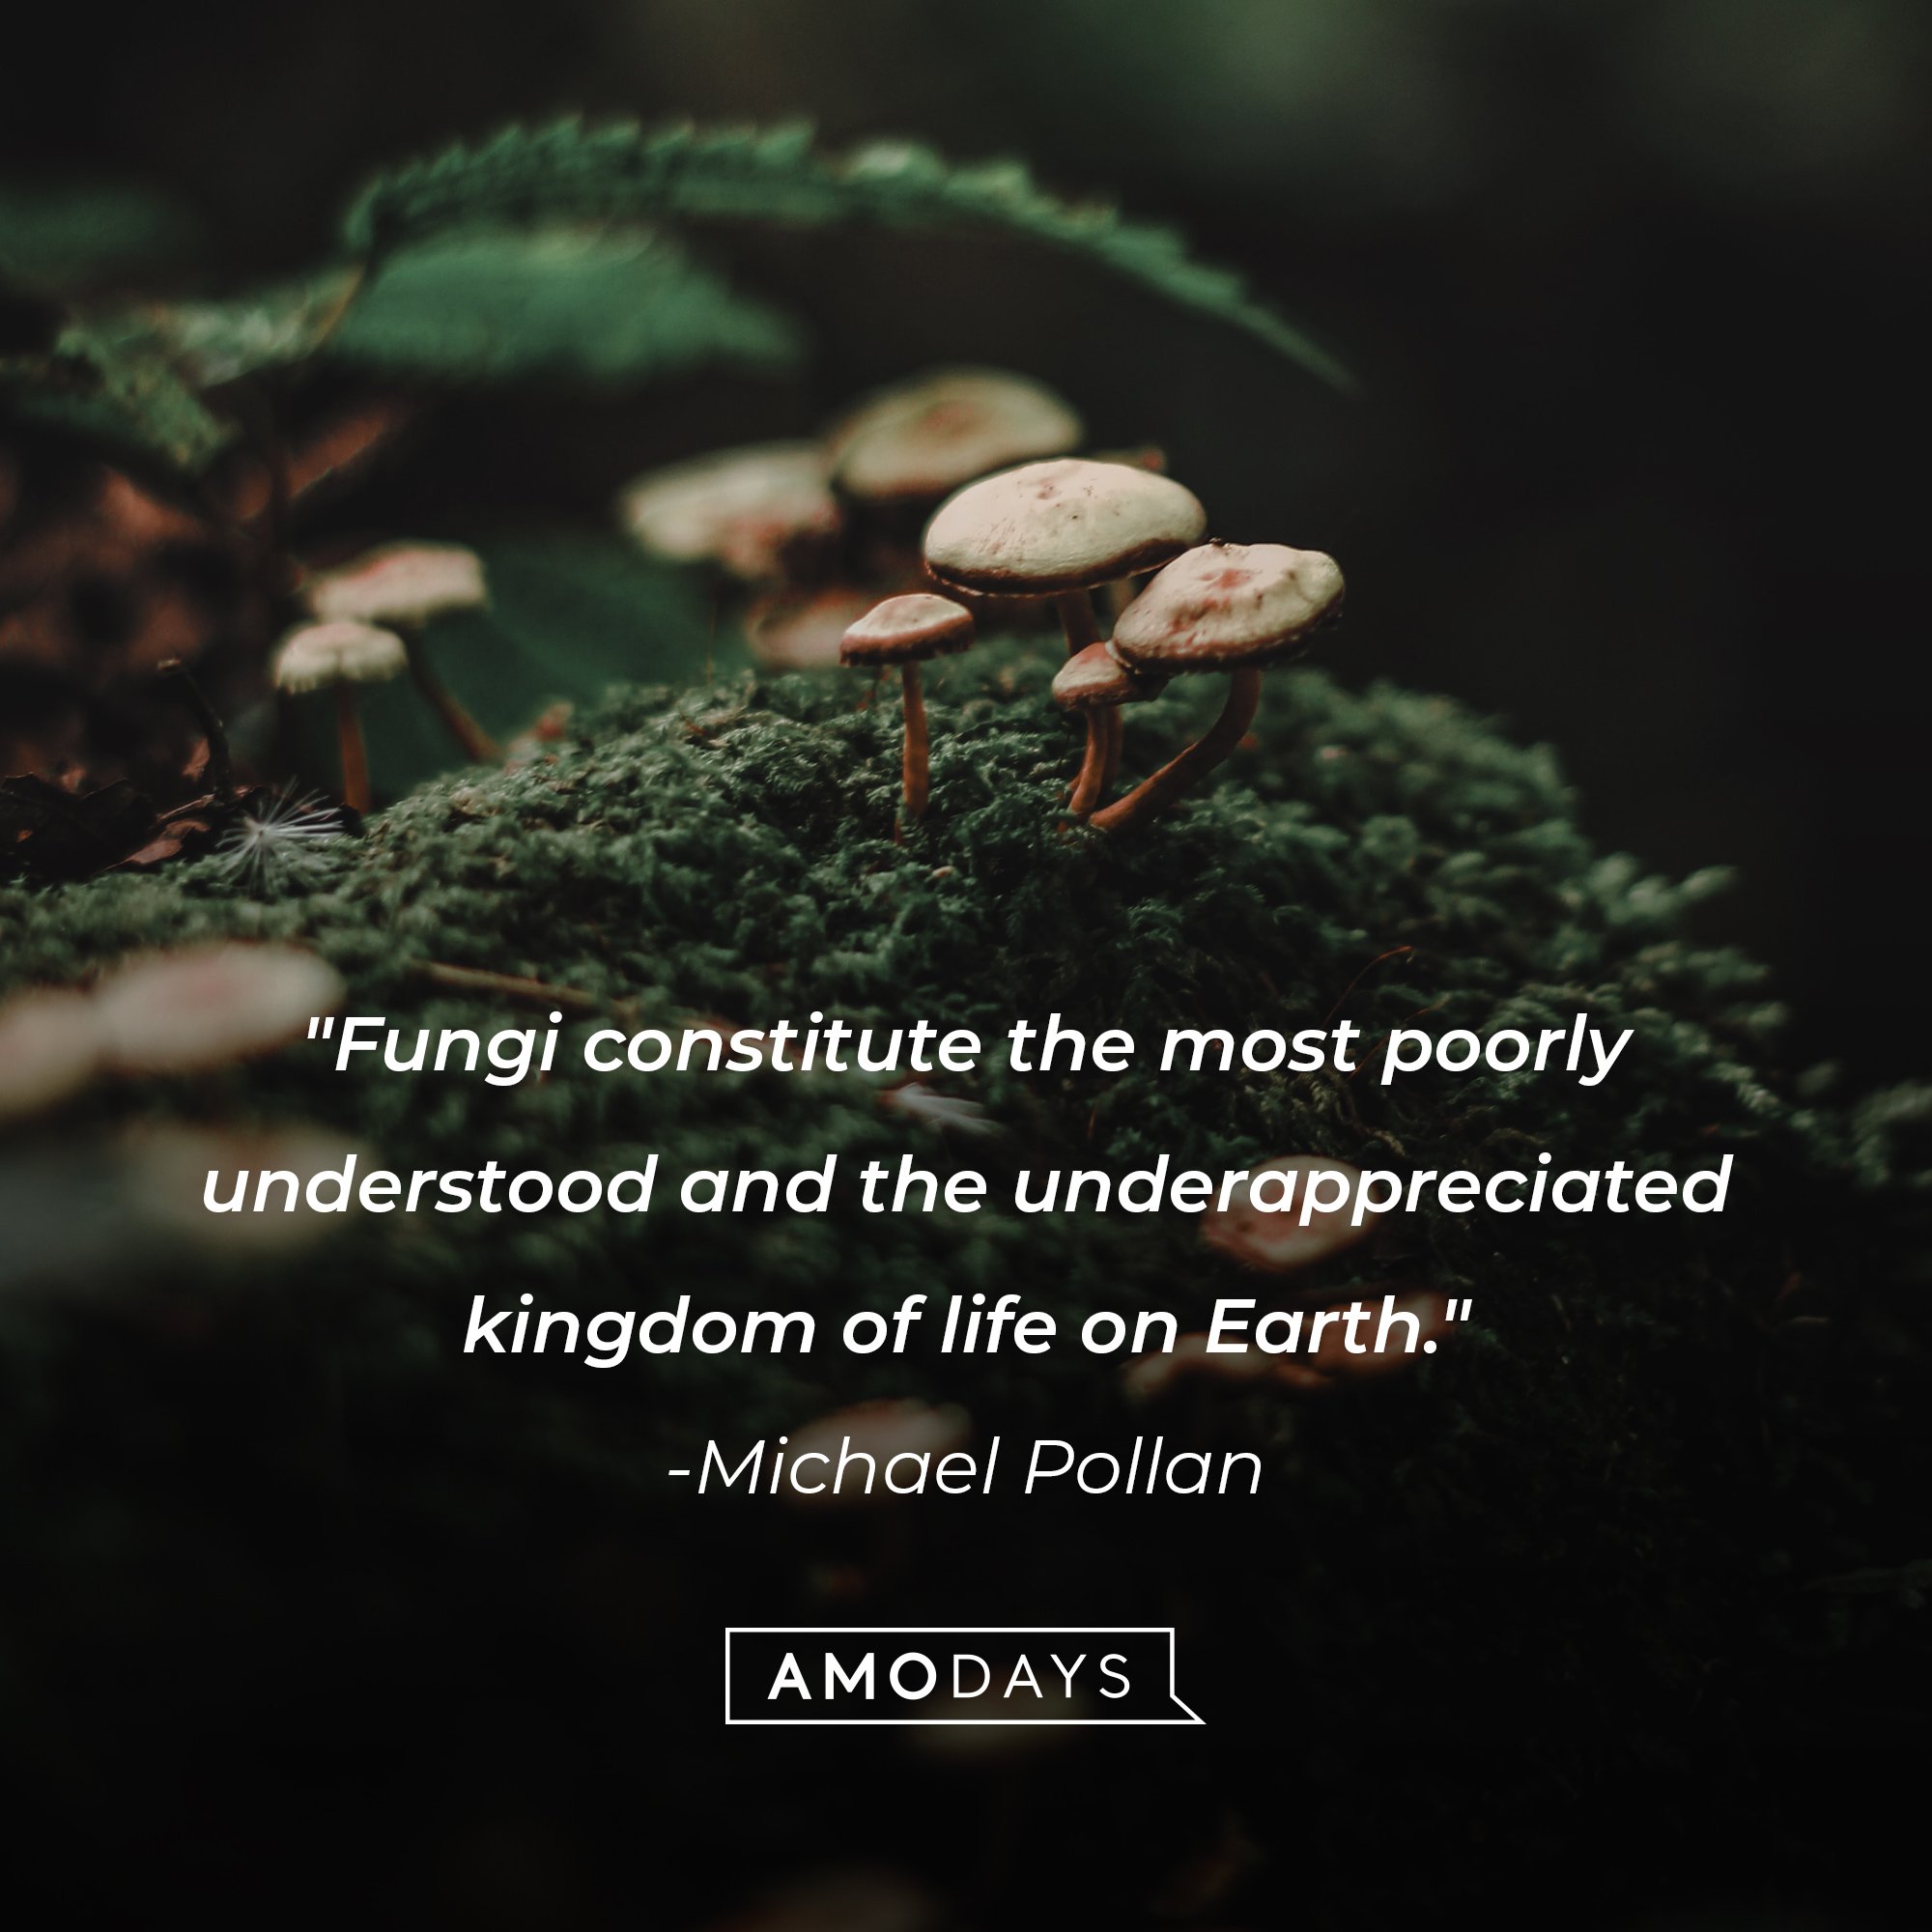 Michael Pollan’s quote: "Fungi constitute the most poorly understood and the underappreciated kingdom of life on Earth." | Image: AmoDays